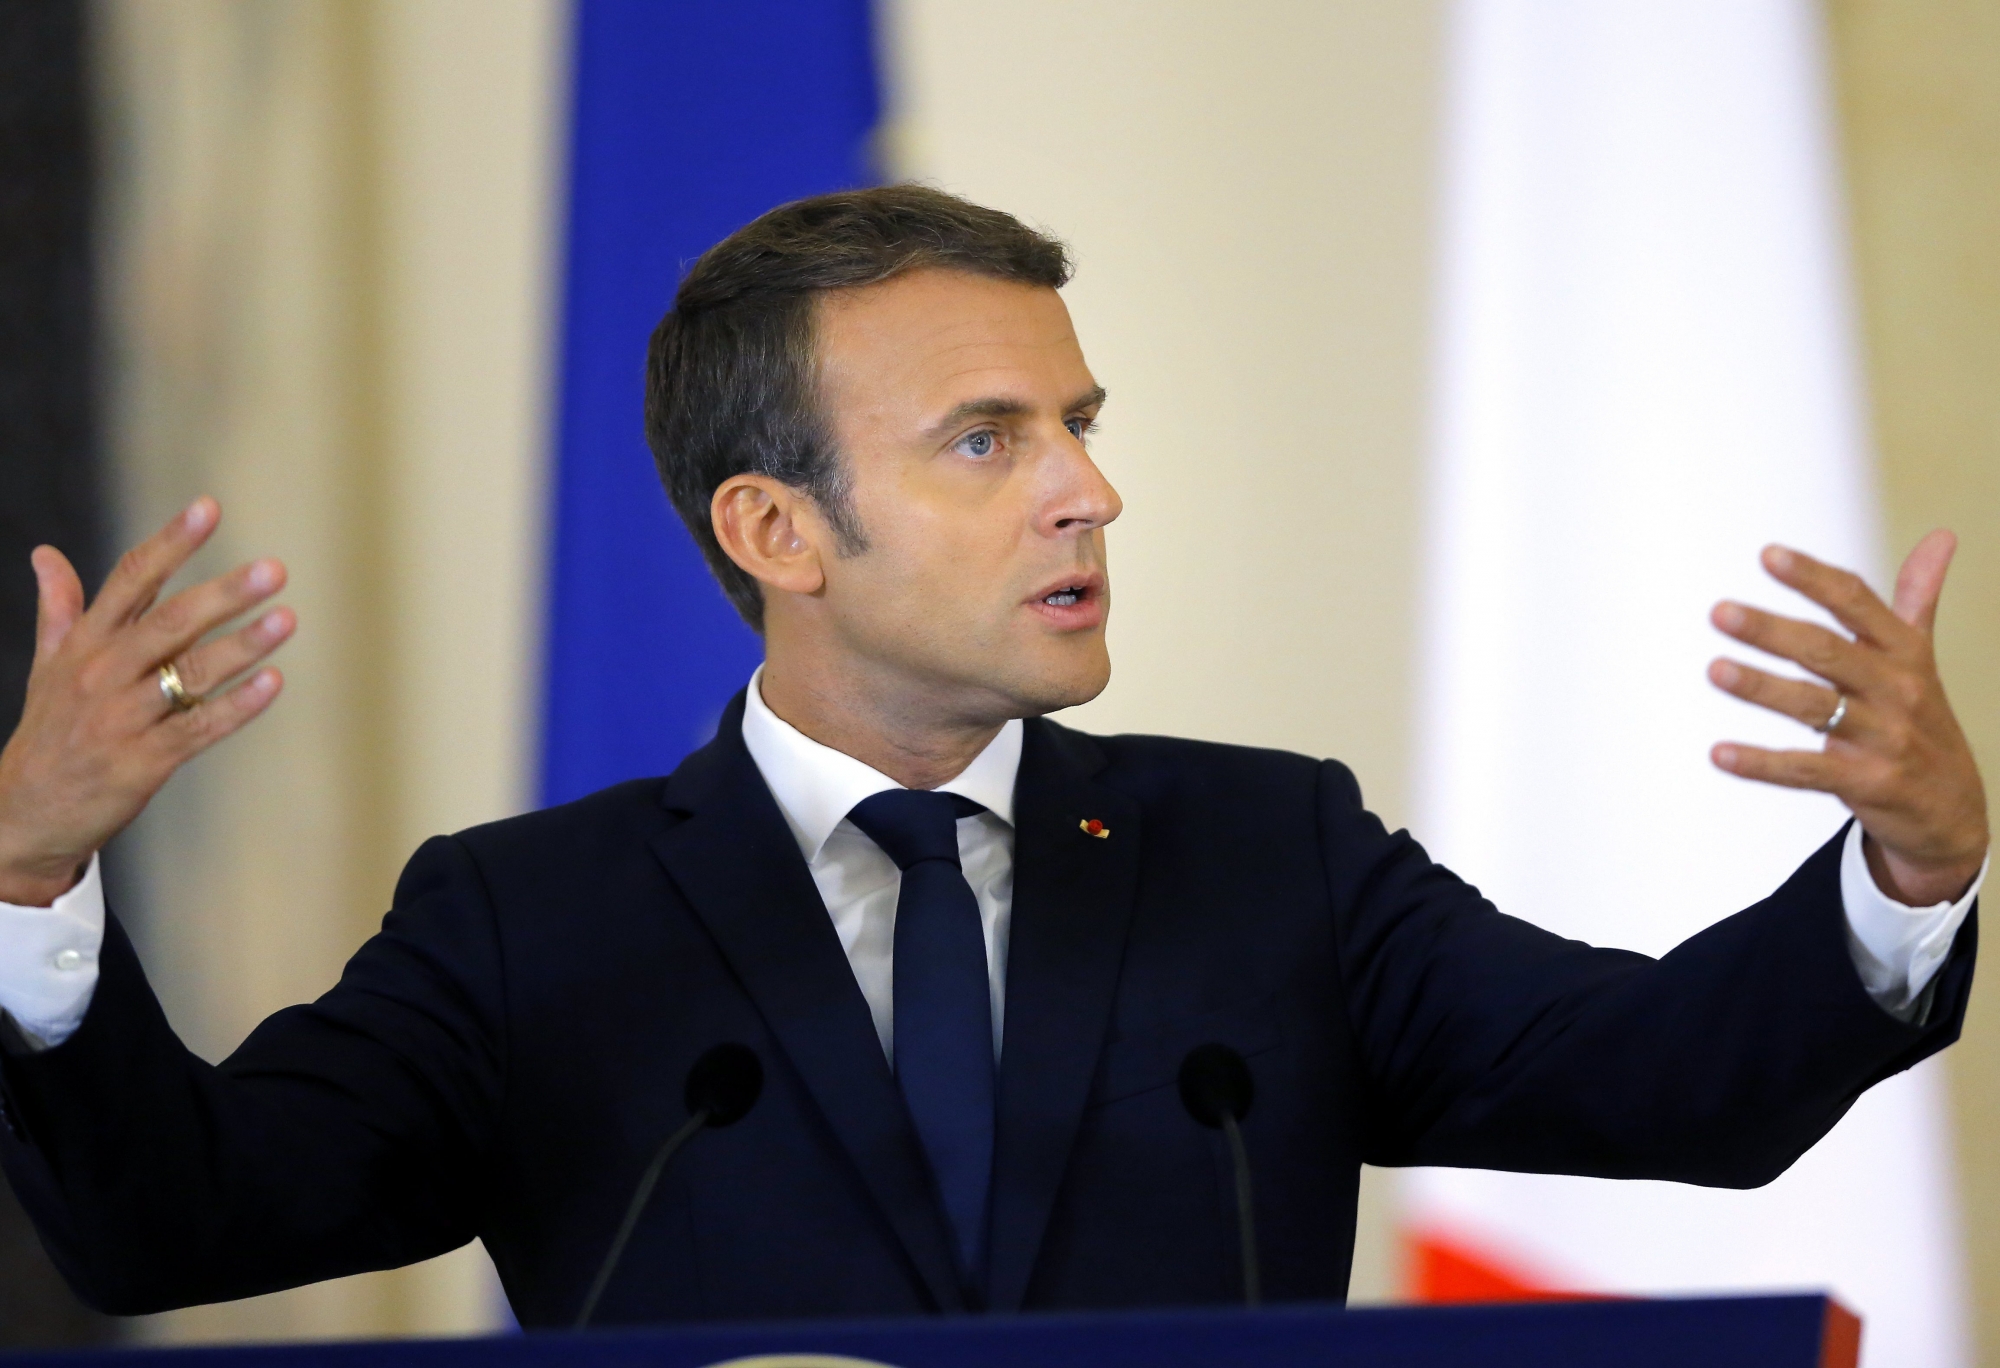 epa06159902 French President Emmanuel Macron gestures while answereing to journalists' questions on new labor regulation during a joint news conference with his Romanian counterpart Klaus Iohannis (not pictured) at the Cotroceni Palace, in Bucharest, Romania, 24 August 2017. Macron is on a one-day official visit to Romania, as part of his central and east European tour.  EPA/ROBERT GHEMENT ROMANIA FRANCE DIPLOMACY